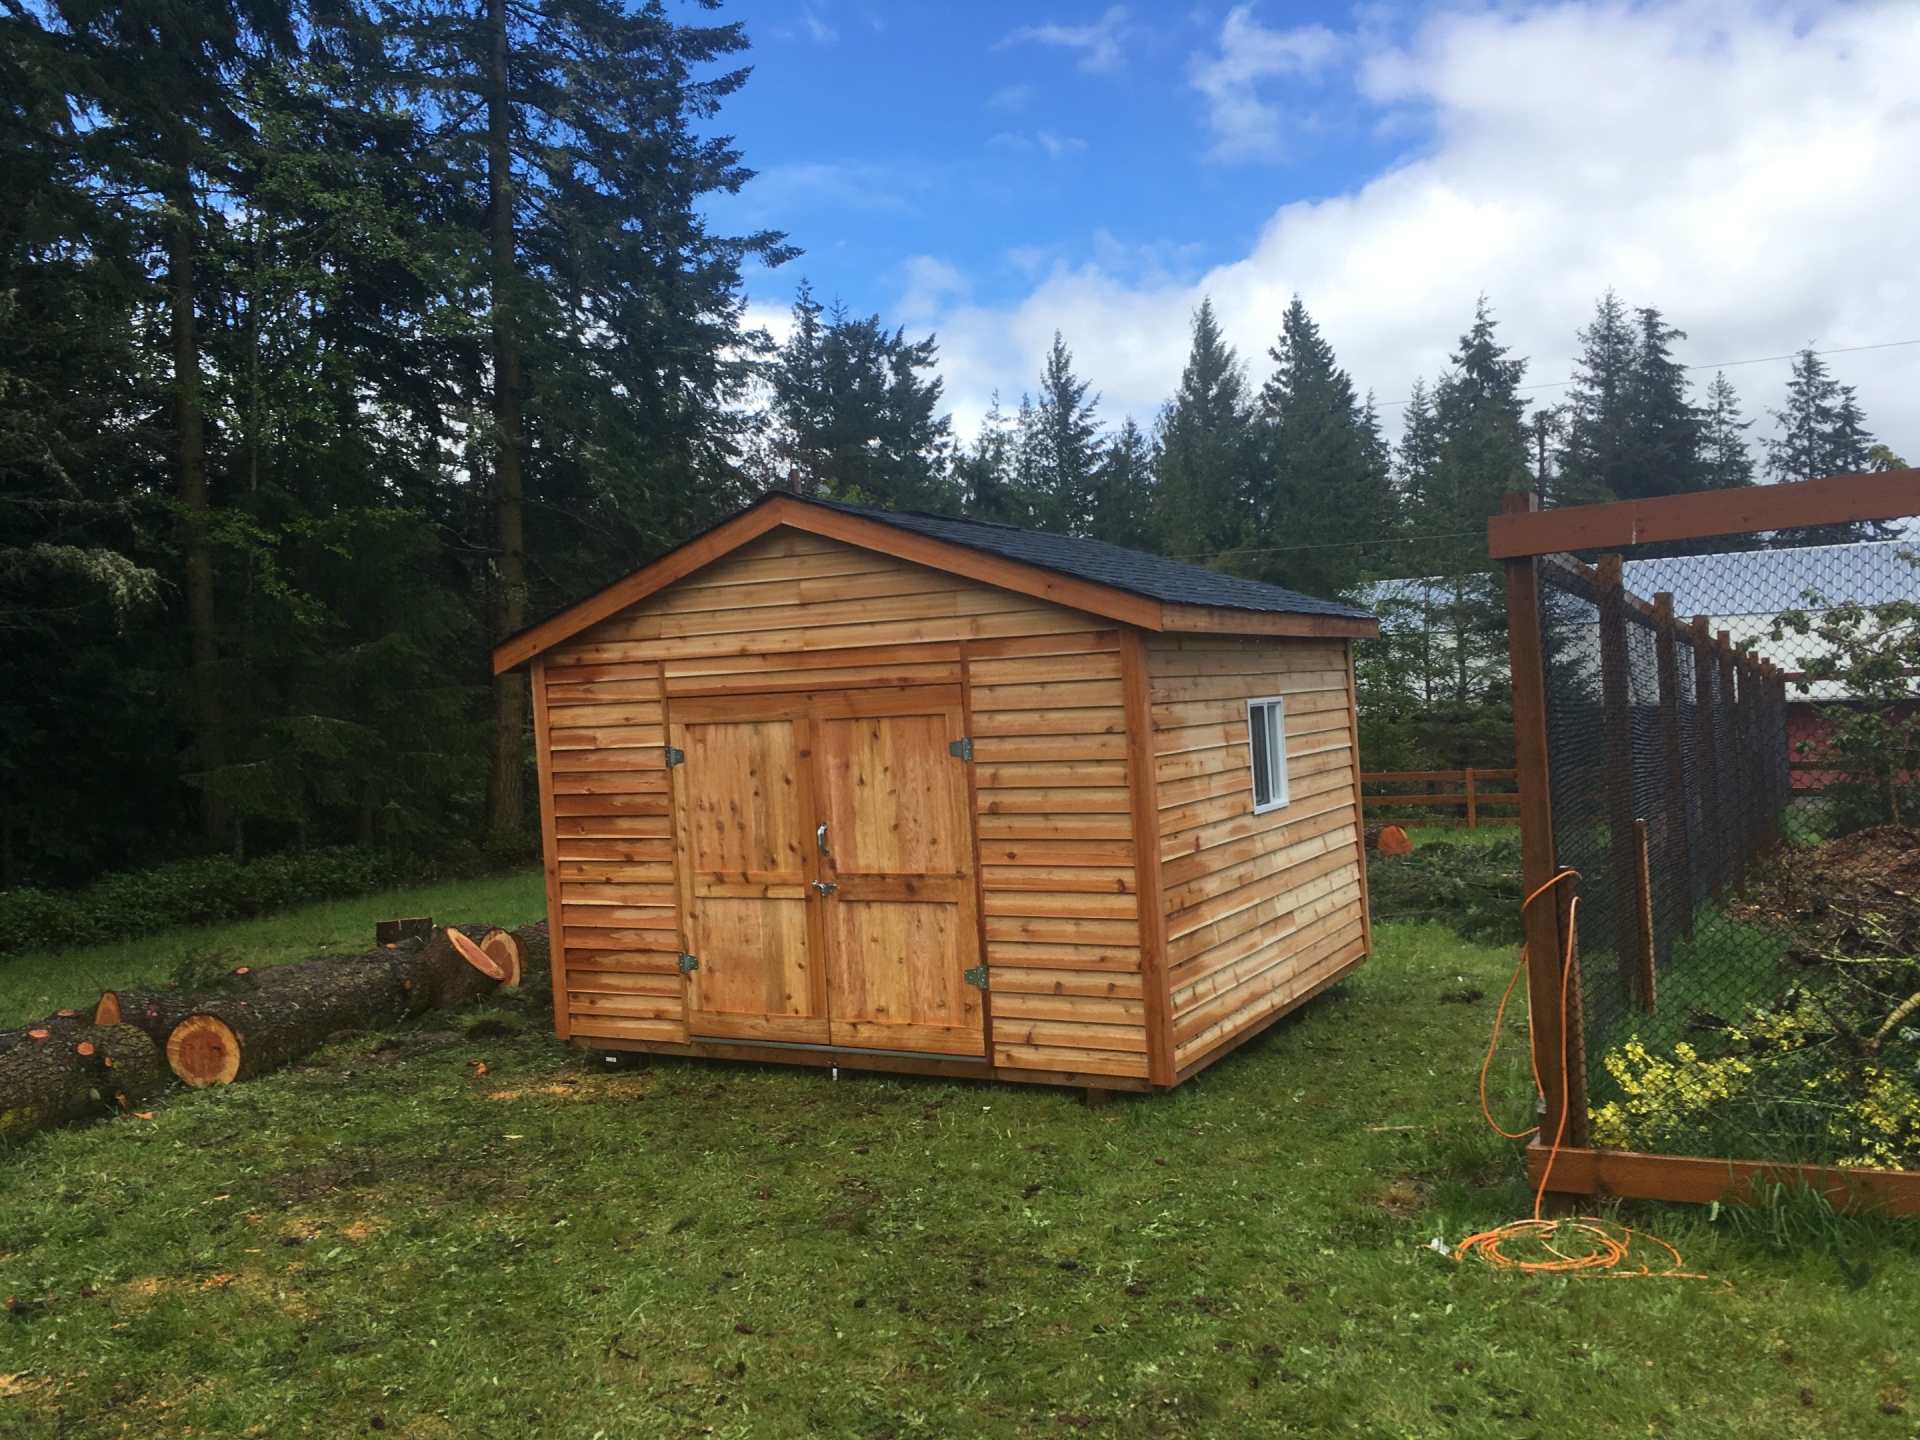 12X12 Standard Shed